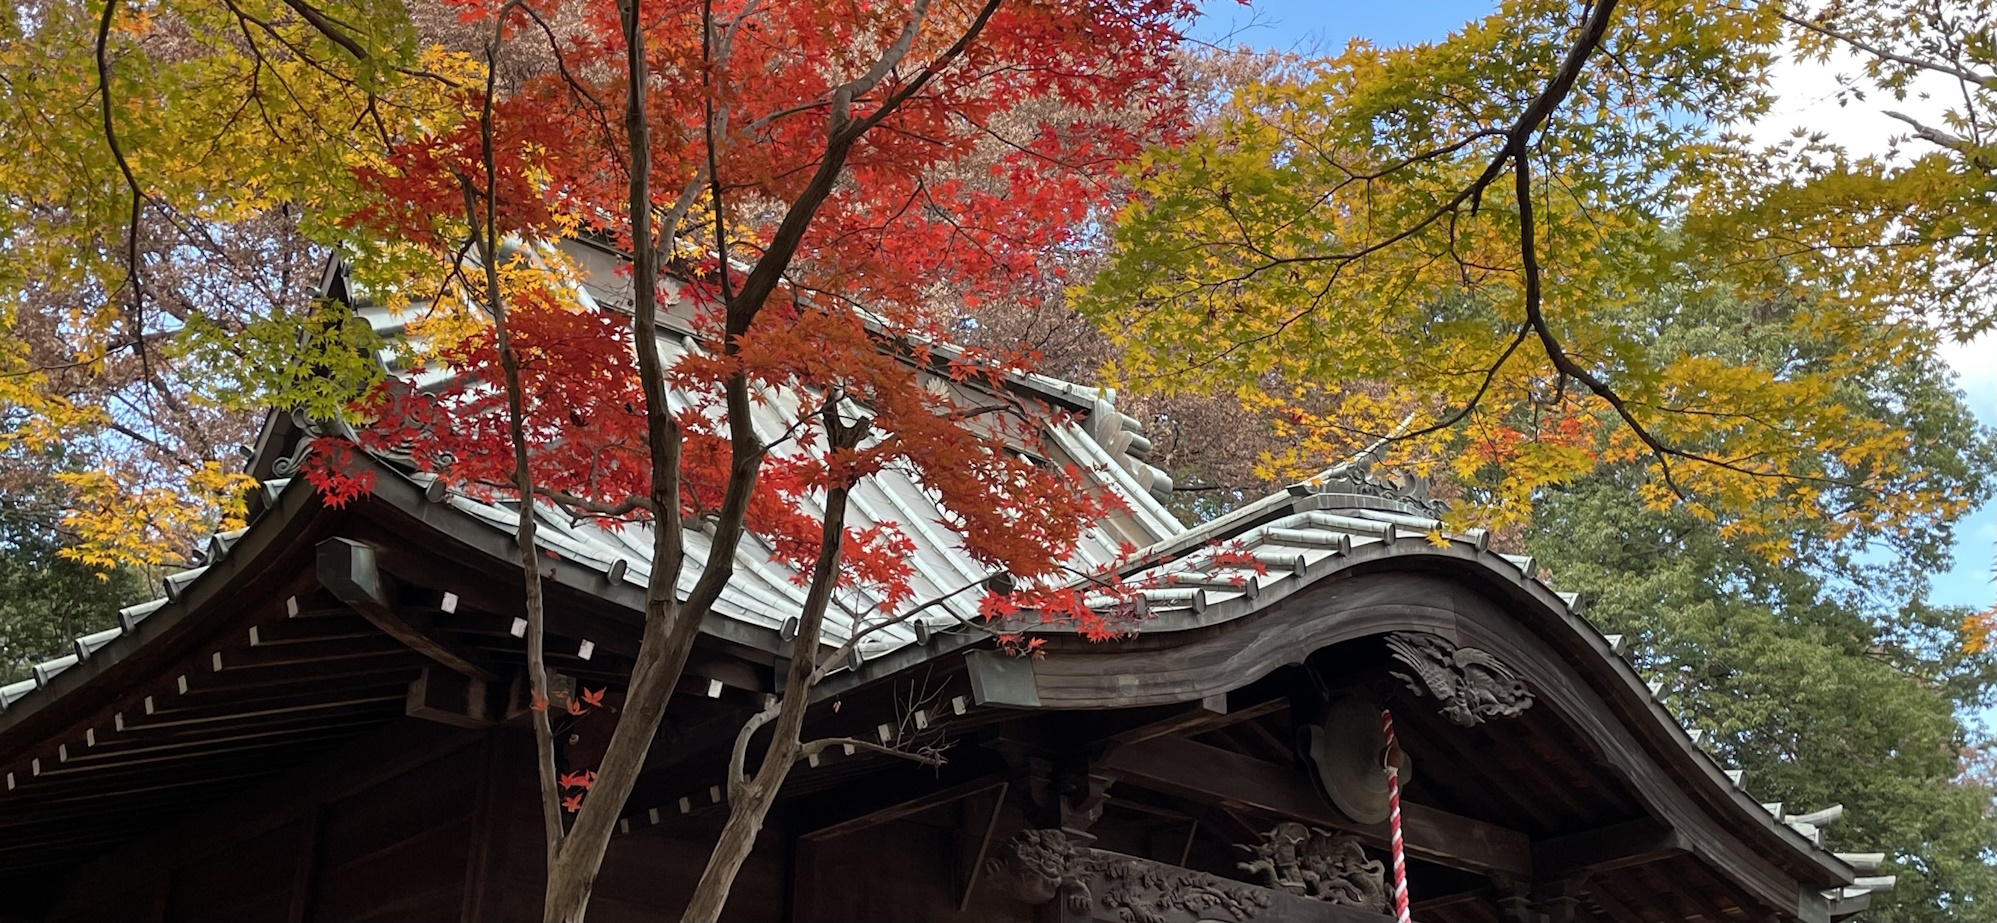 Green, red and gold Japanese maple leaves against the dark curving wood and tile roof of a temple building.